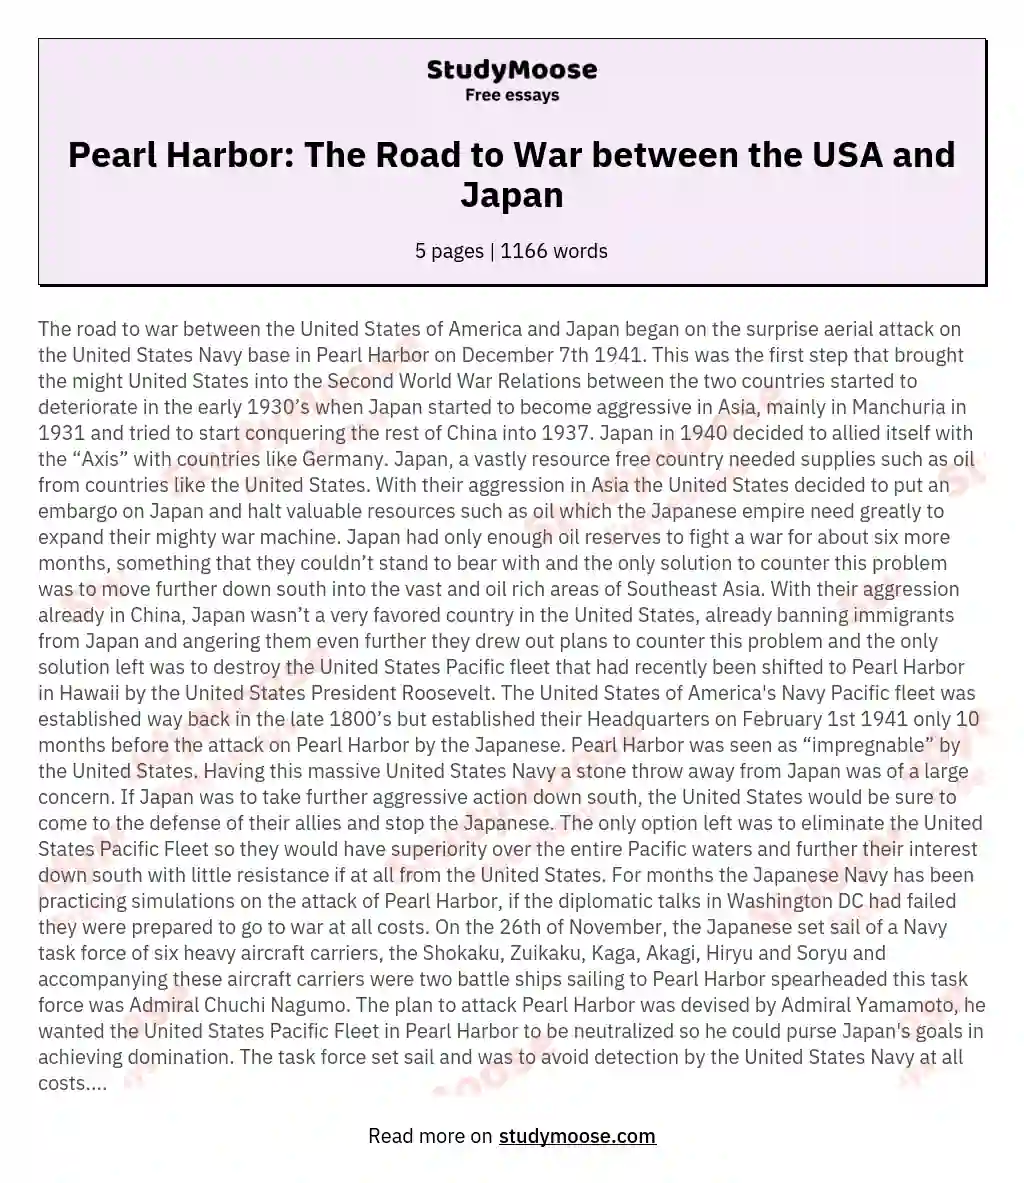 Pearl Harbor: The Road to War between the USA and Japan essay